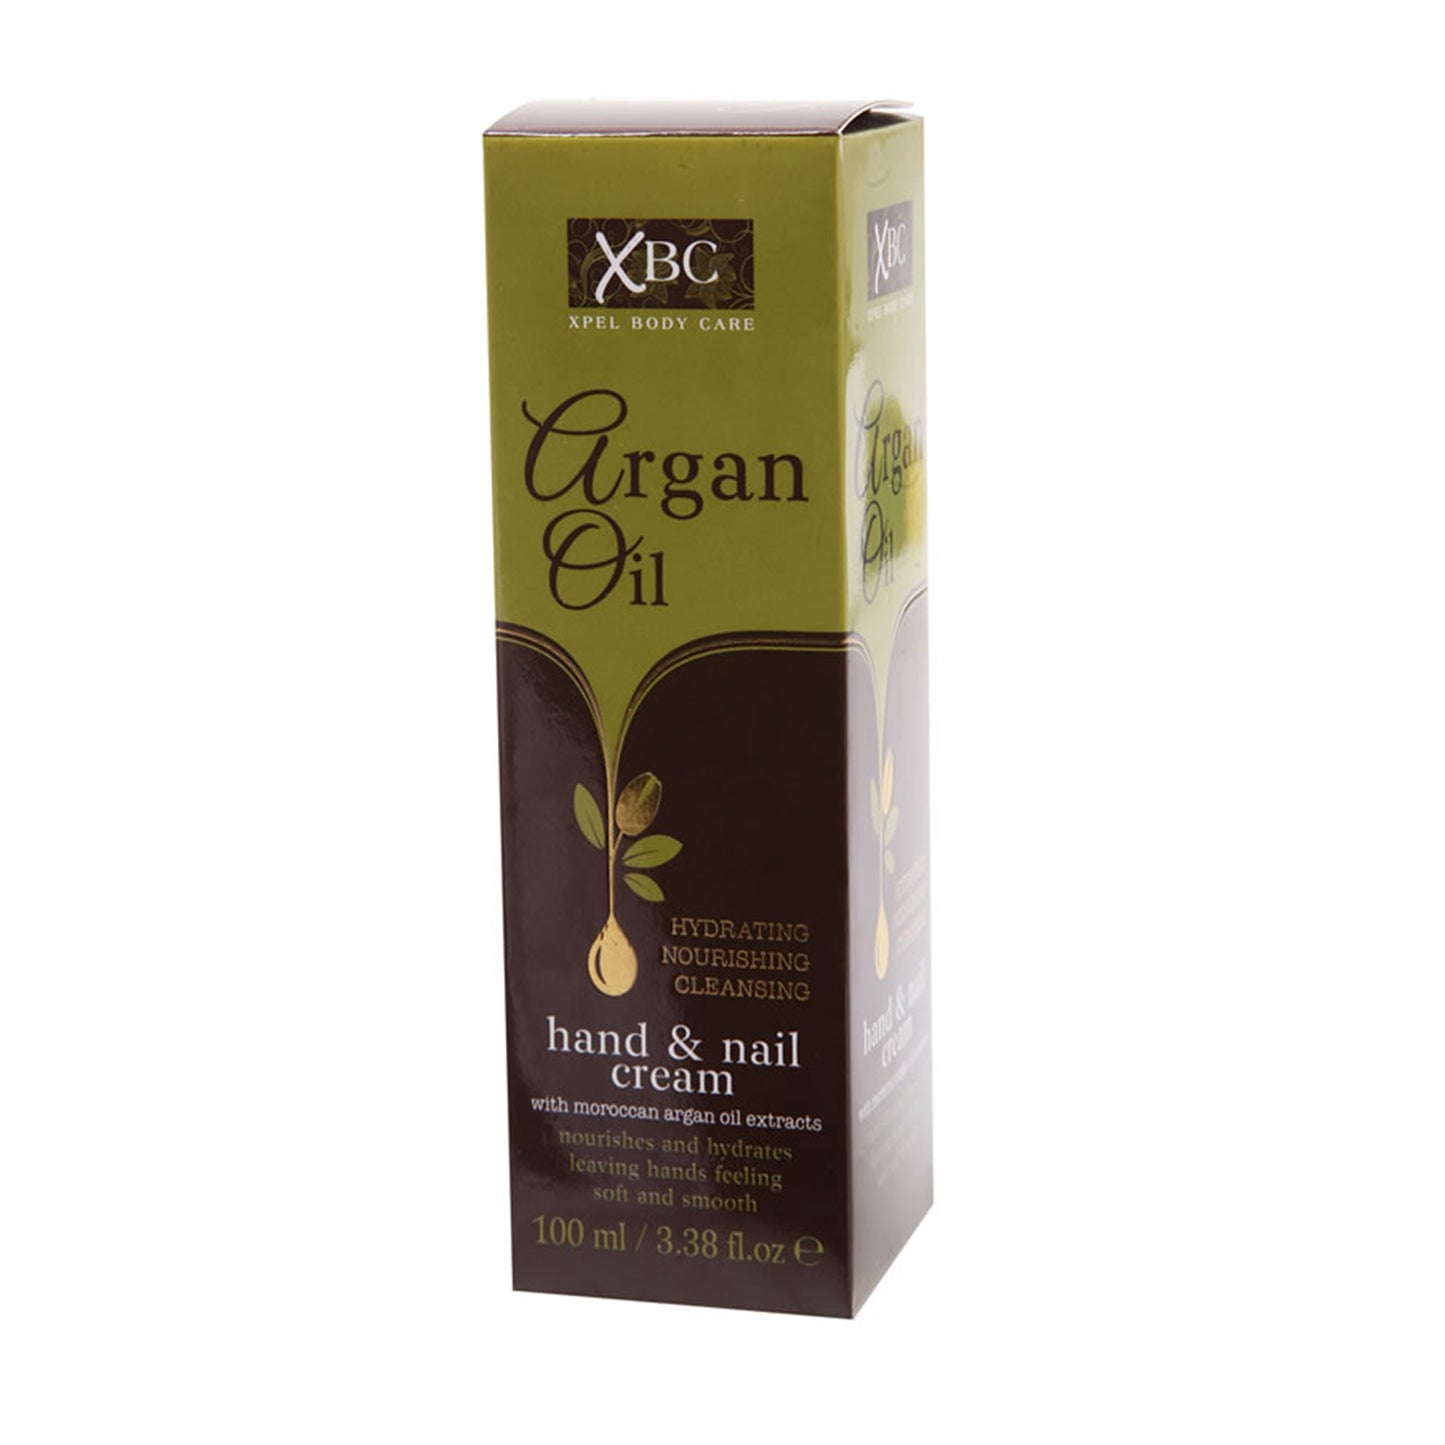 XPEL HAIR CARE - ARGAN OIL HAND & NAIL CREAM WITH MOROCCAN ARGAN OIL EXTRACT - 100ML